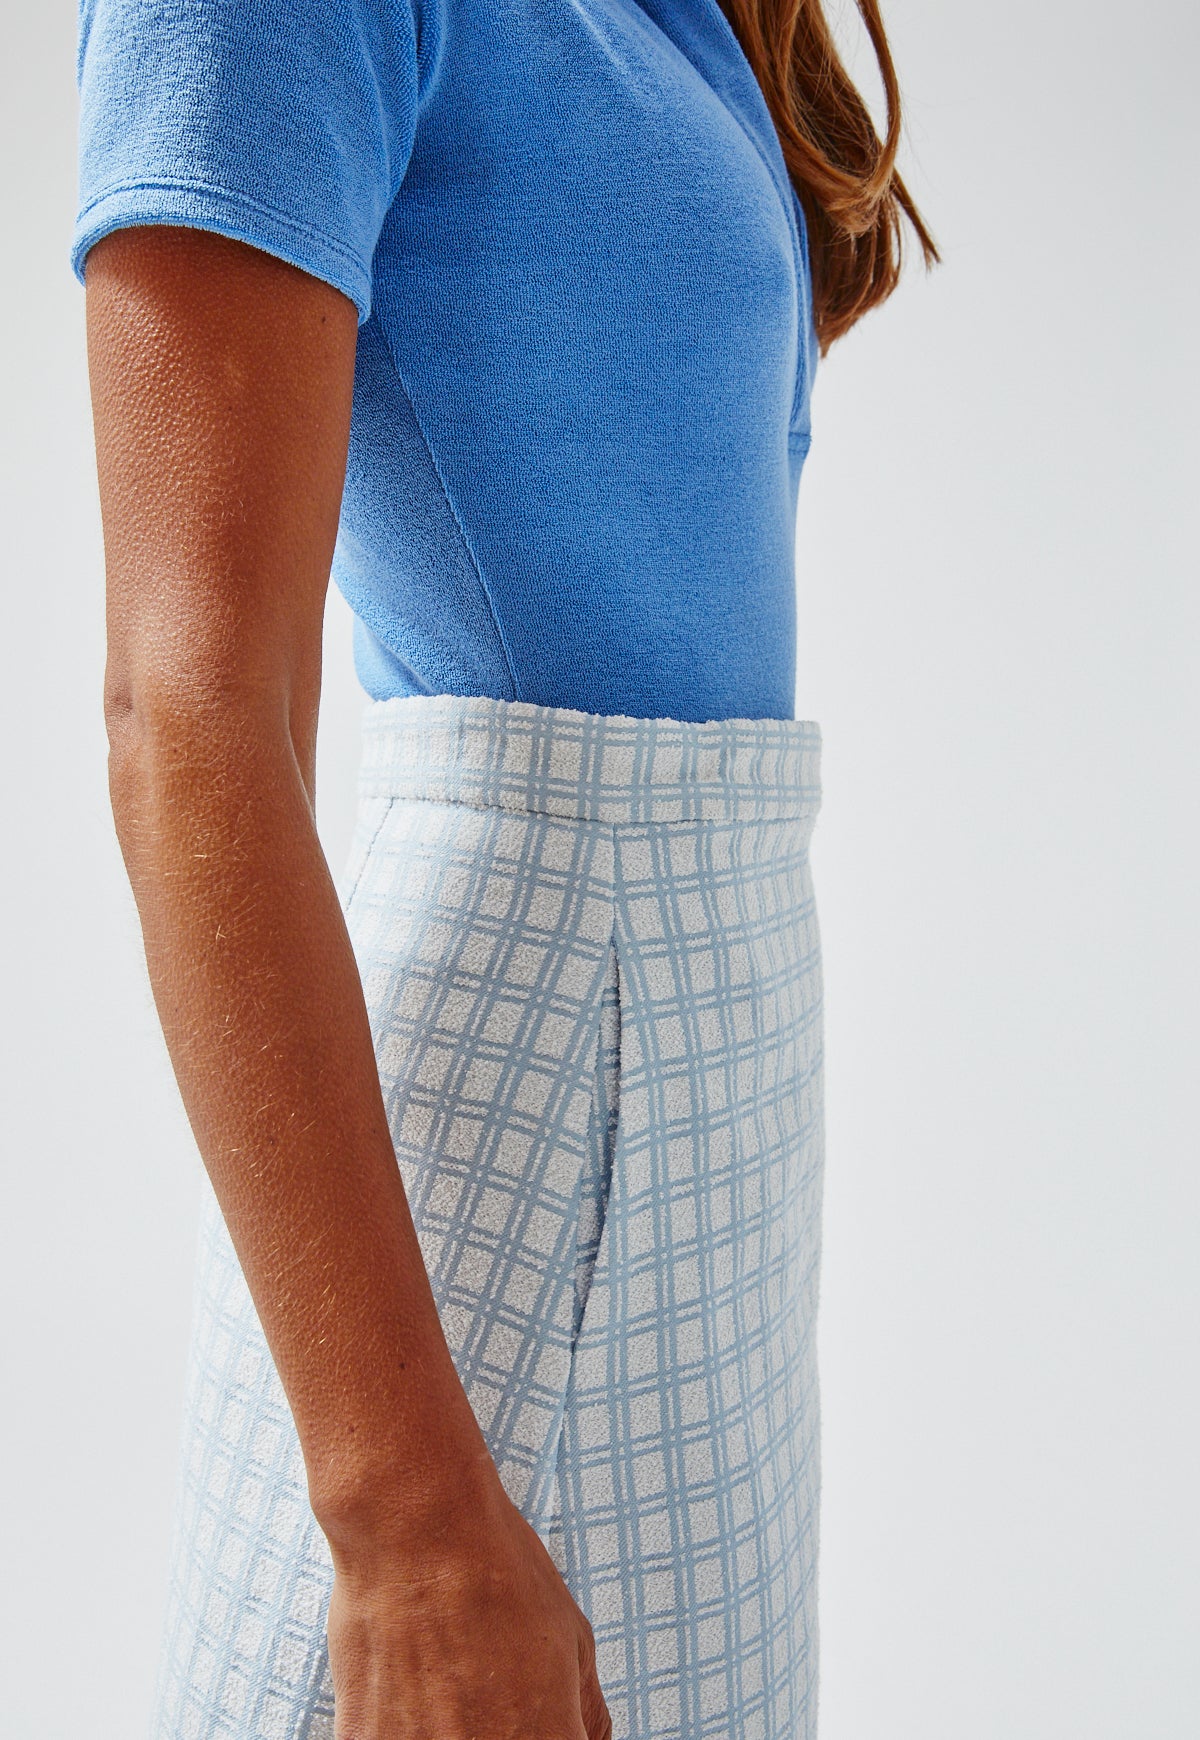 THE WRAP SKIRT in VINTAGE BLUE CHECK BOUCLE COTTON